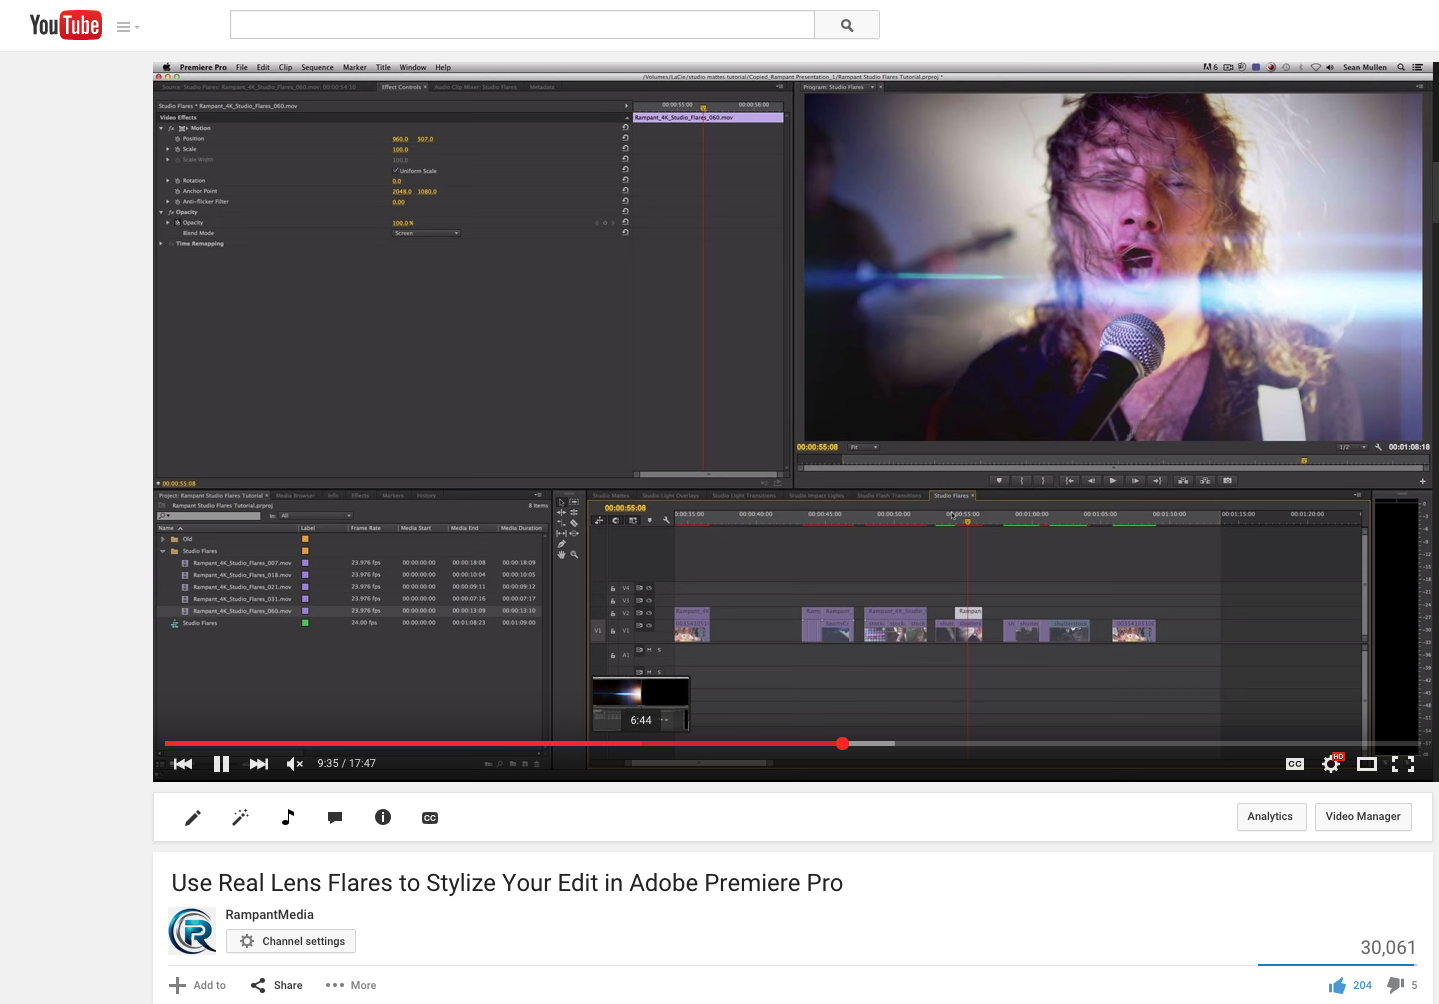 Use Real Lens Flares to Stylize Your Edit in Adobe Premiere Pro